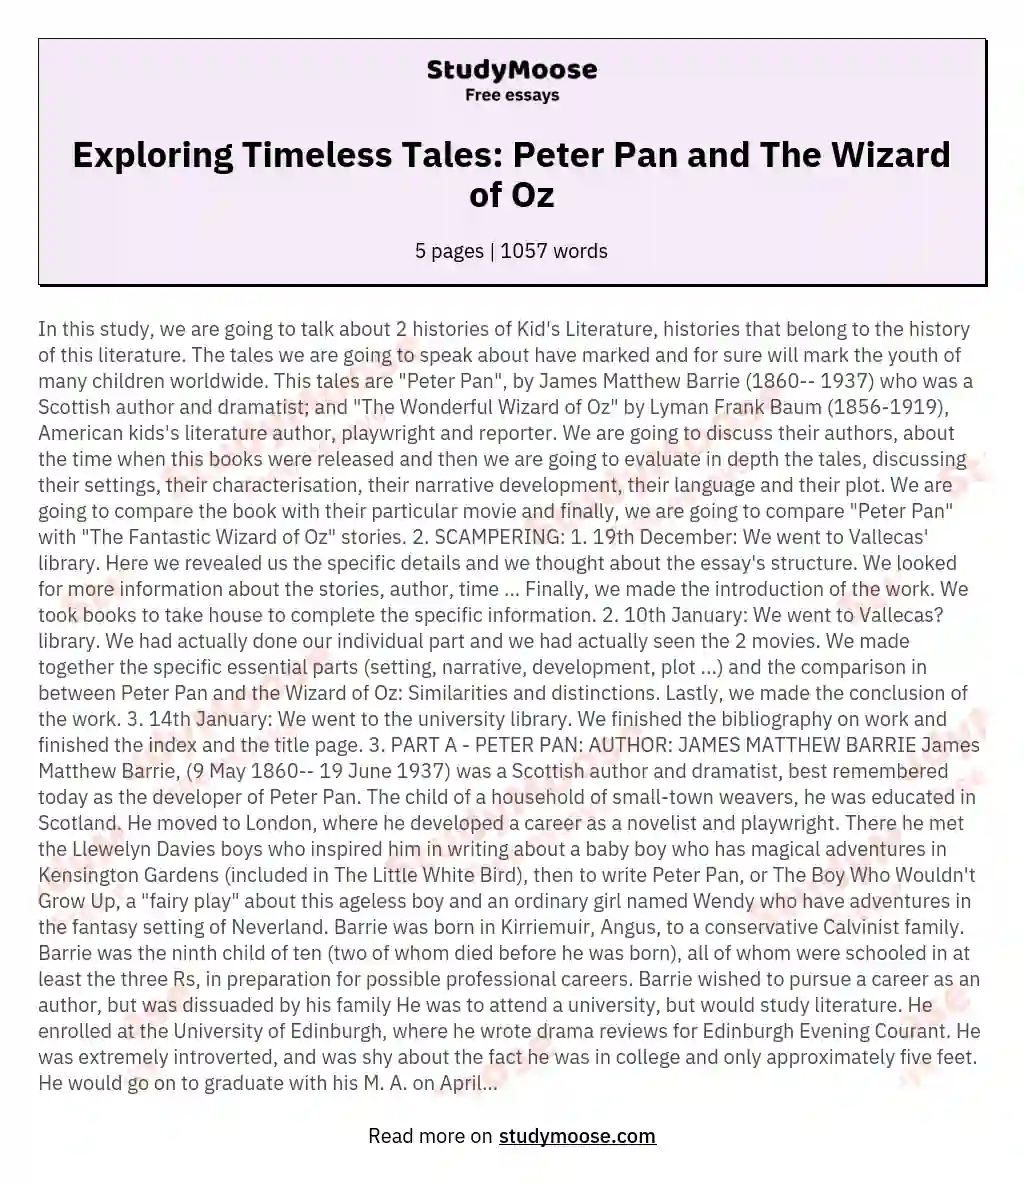 Exploring Timeless Tales: Peter Pan and The Wizard of Oz essay